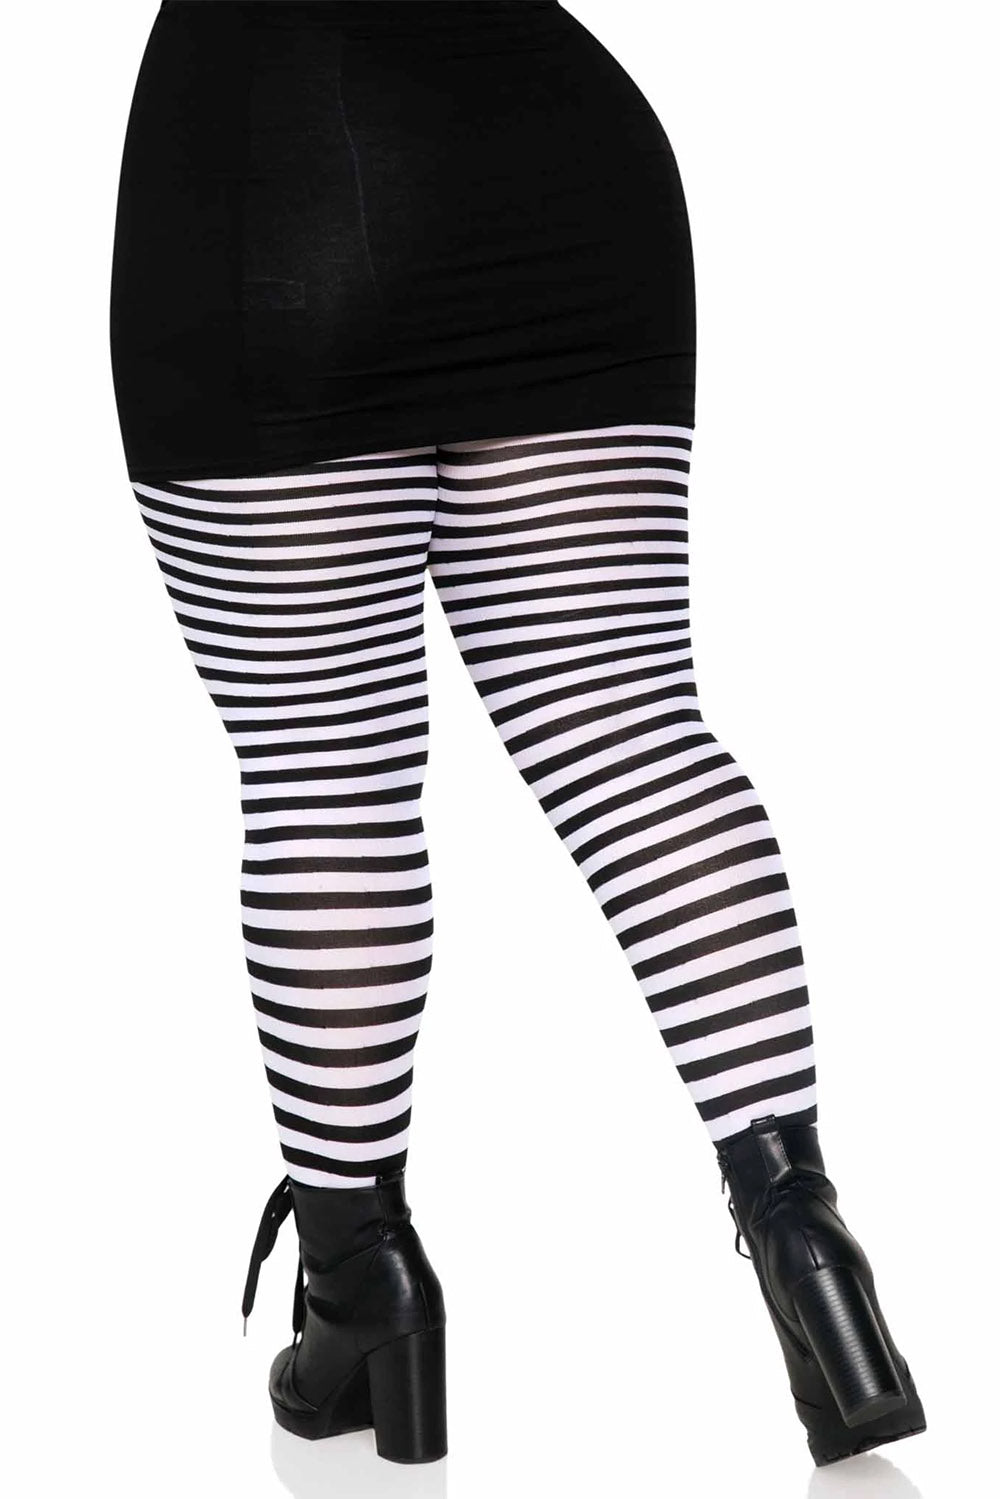 Black Vertical Stripe Tights Plus Too, $12, Zulily